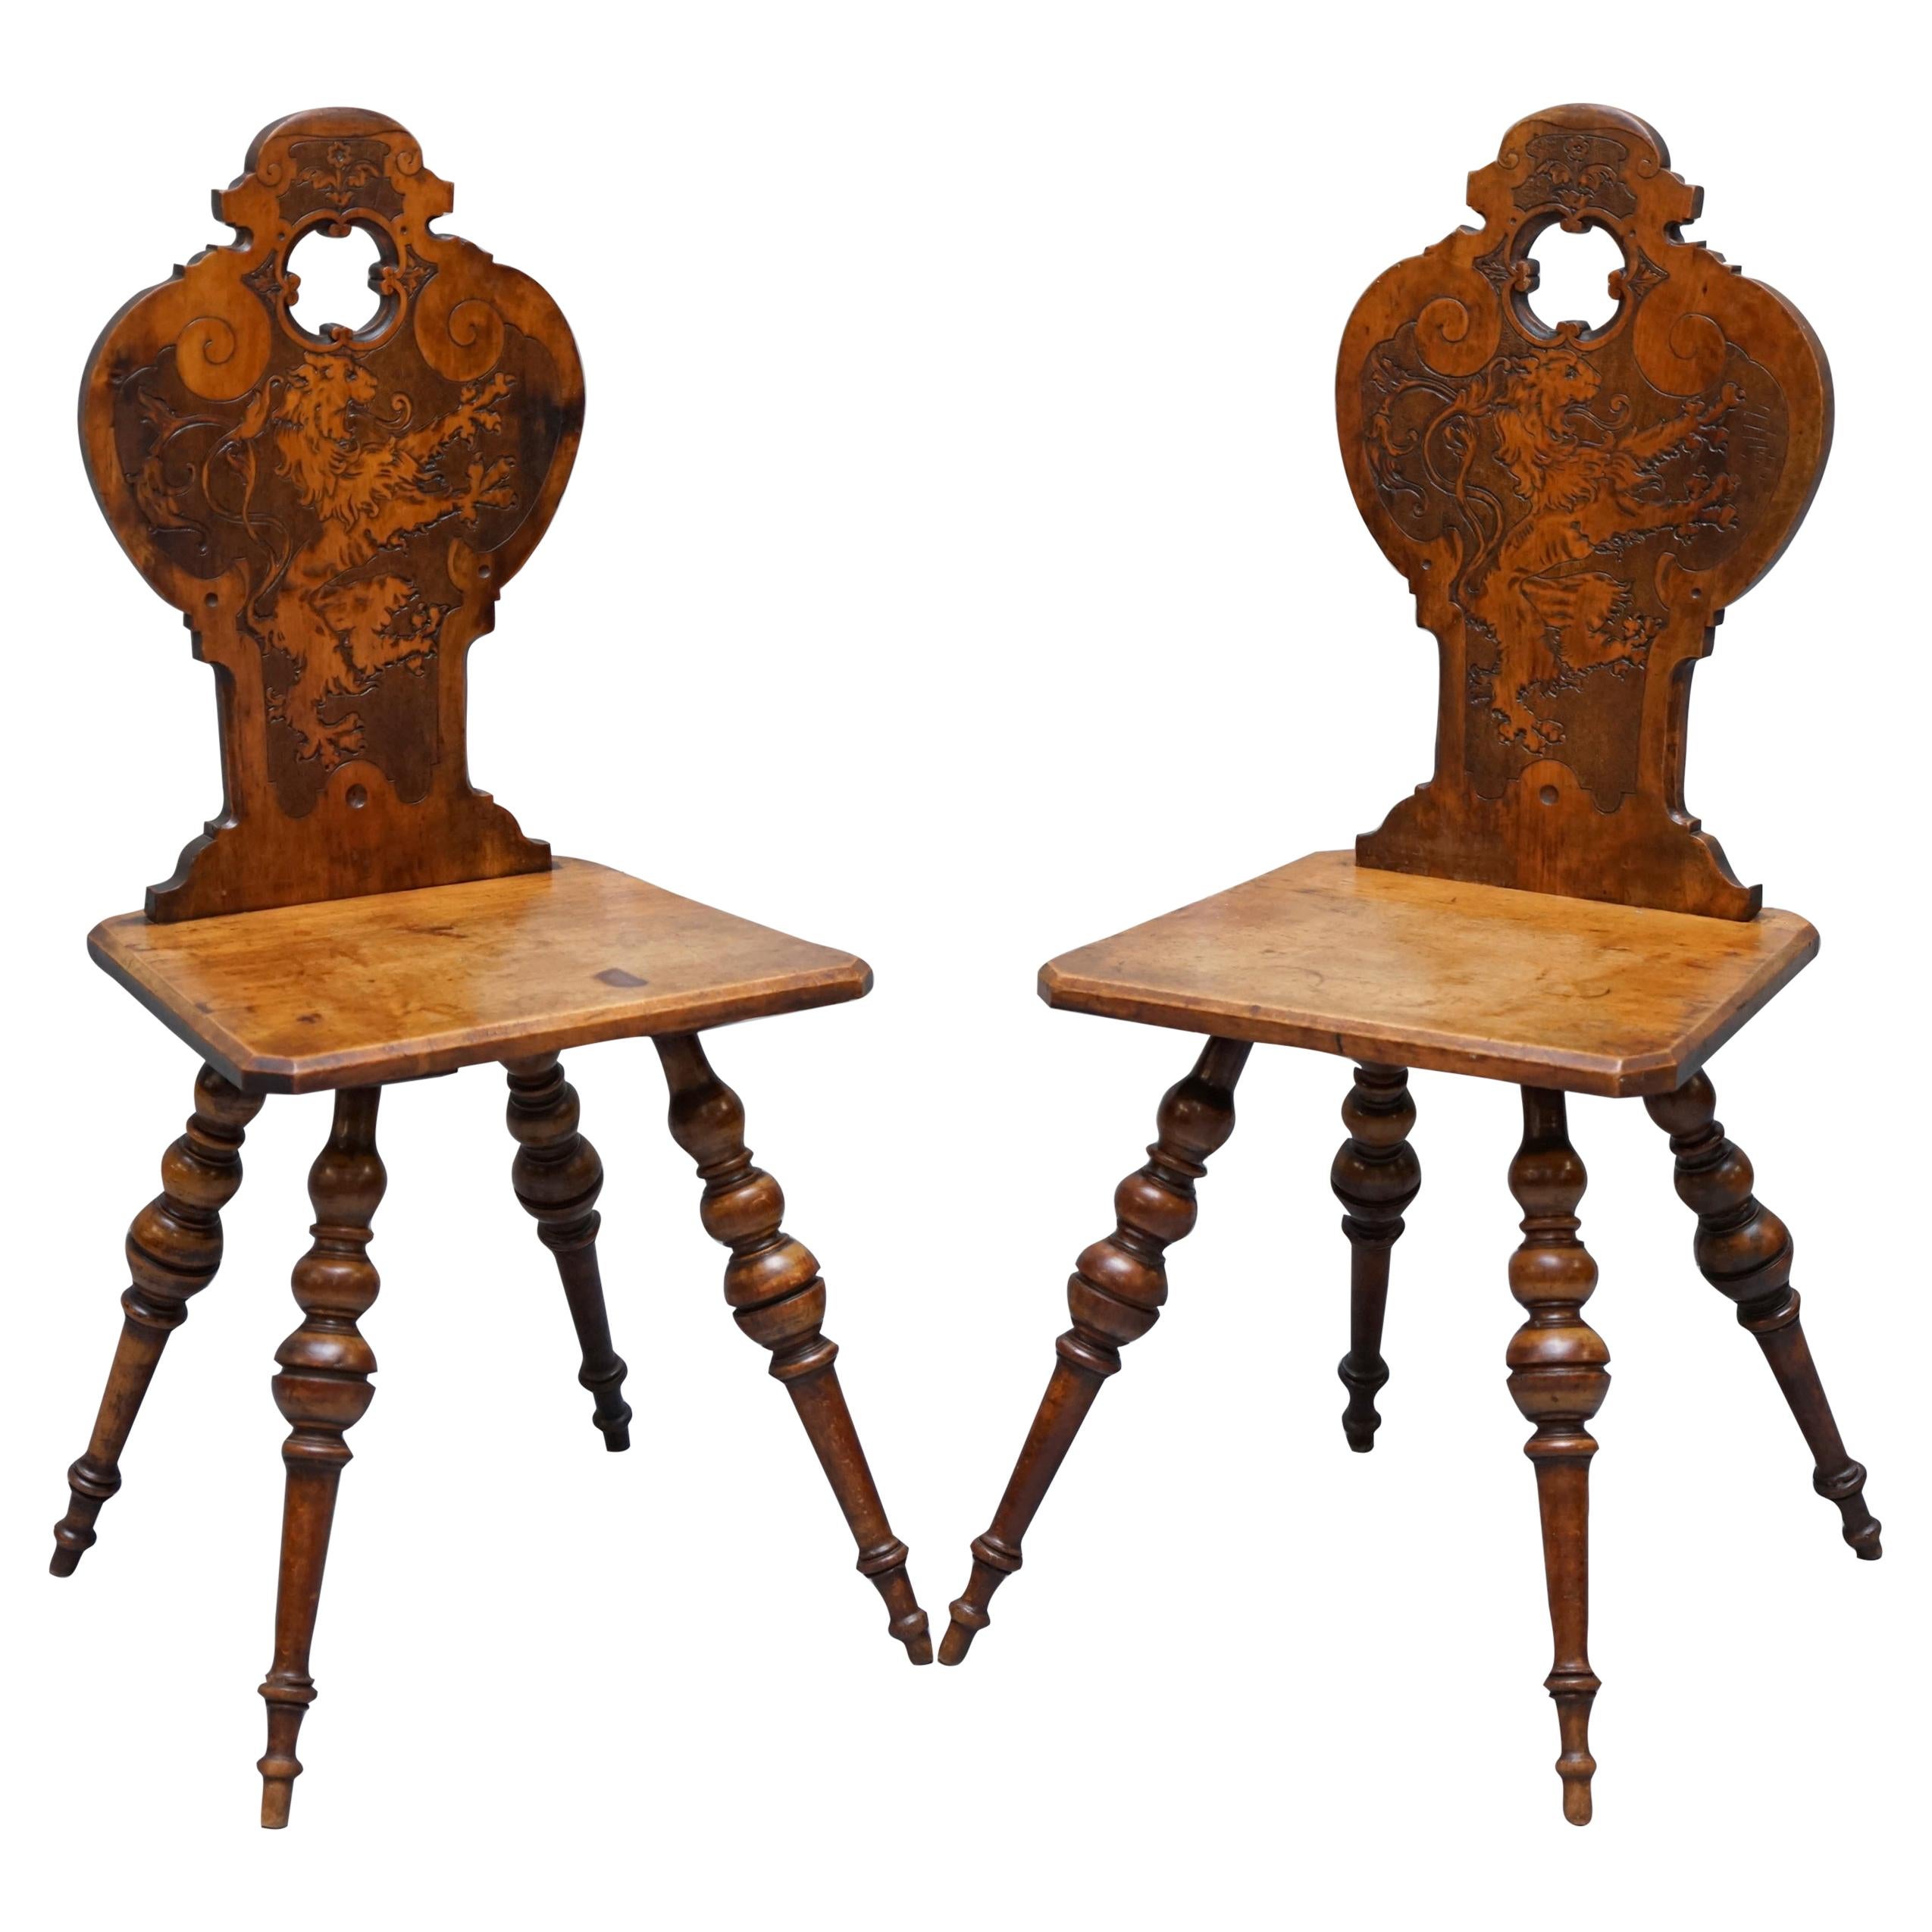 Pair of Stunning Victorian Poker Work Hall Chairs Lion Armorial Crested Backs